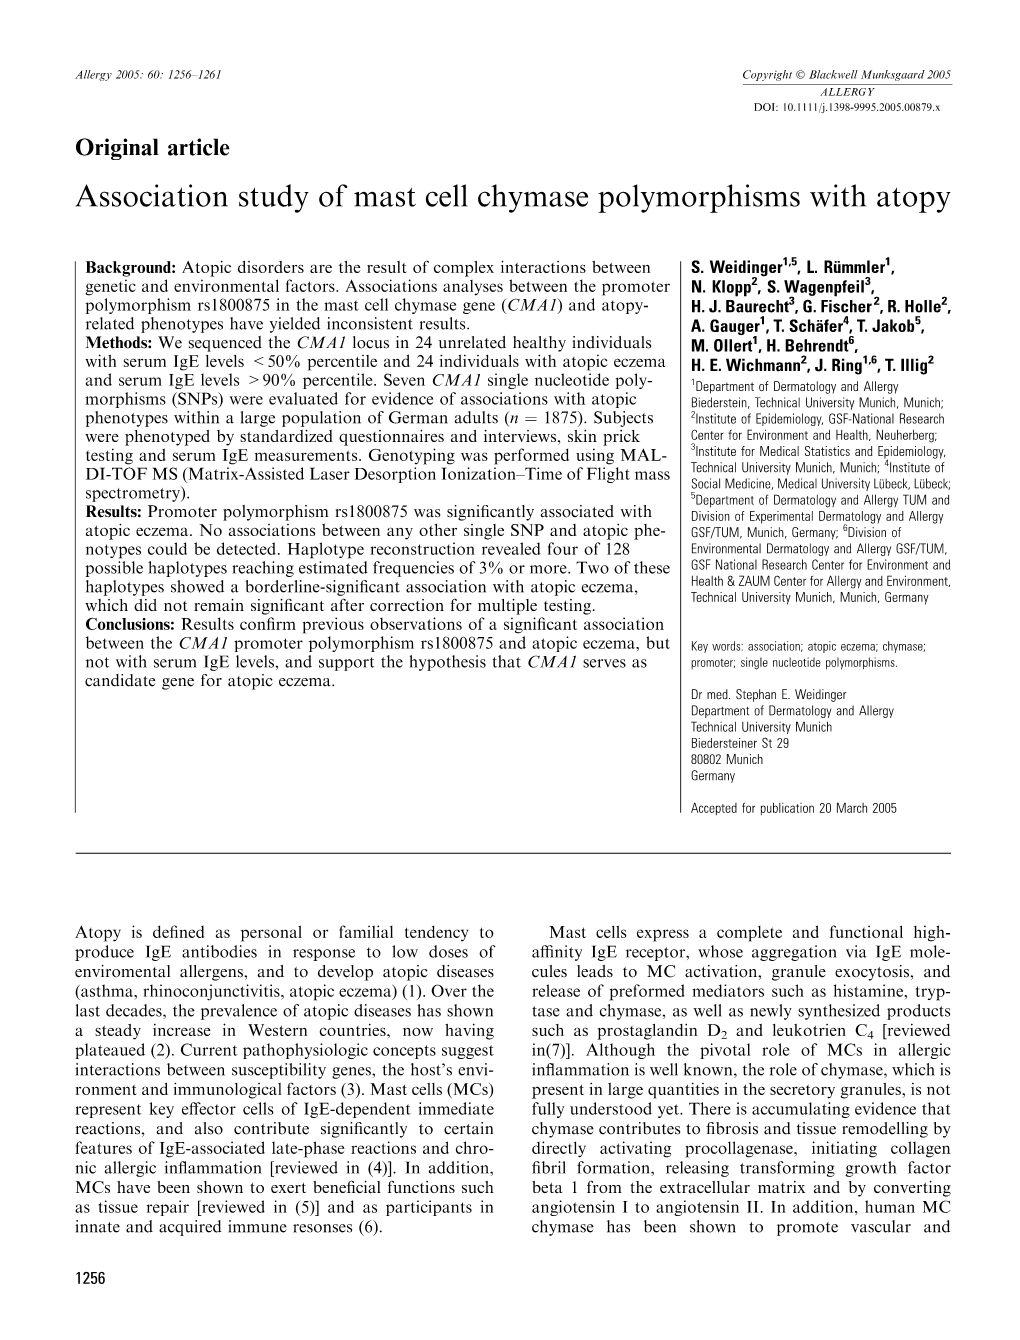 Association Study of Mast Cell Chymase Polymorphisms with Atopy